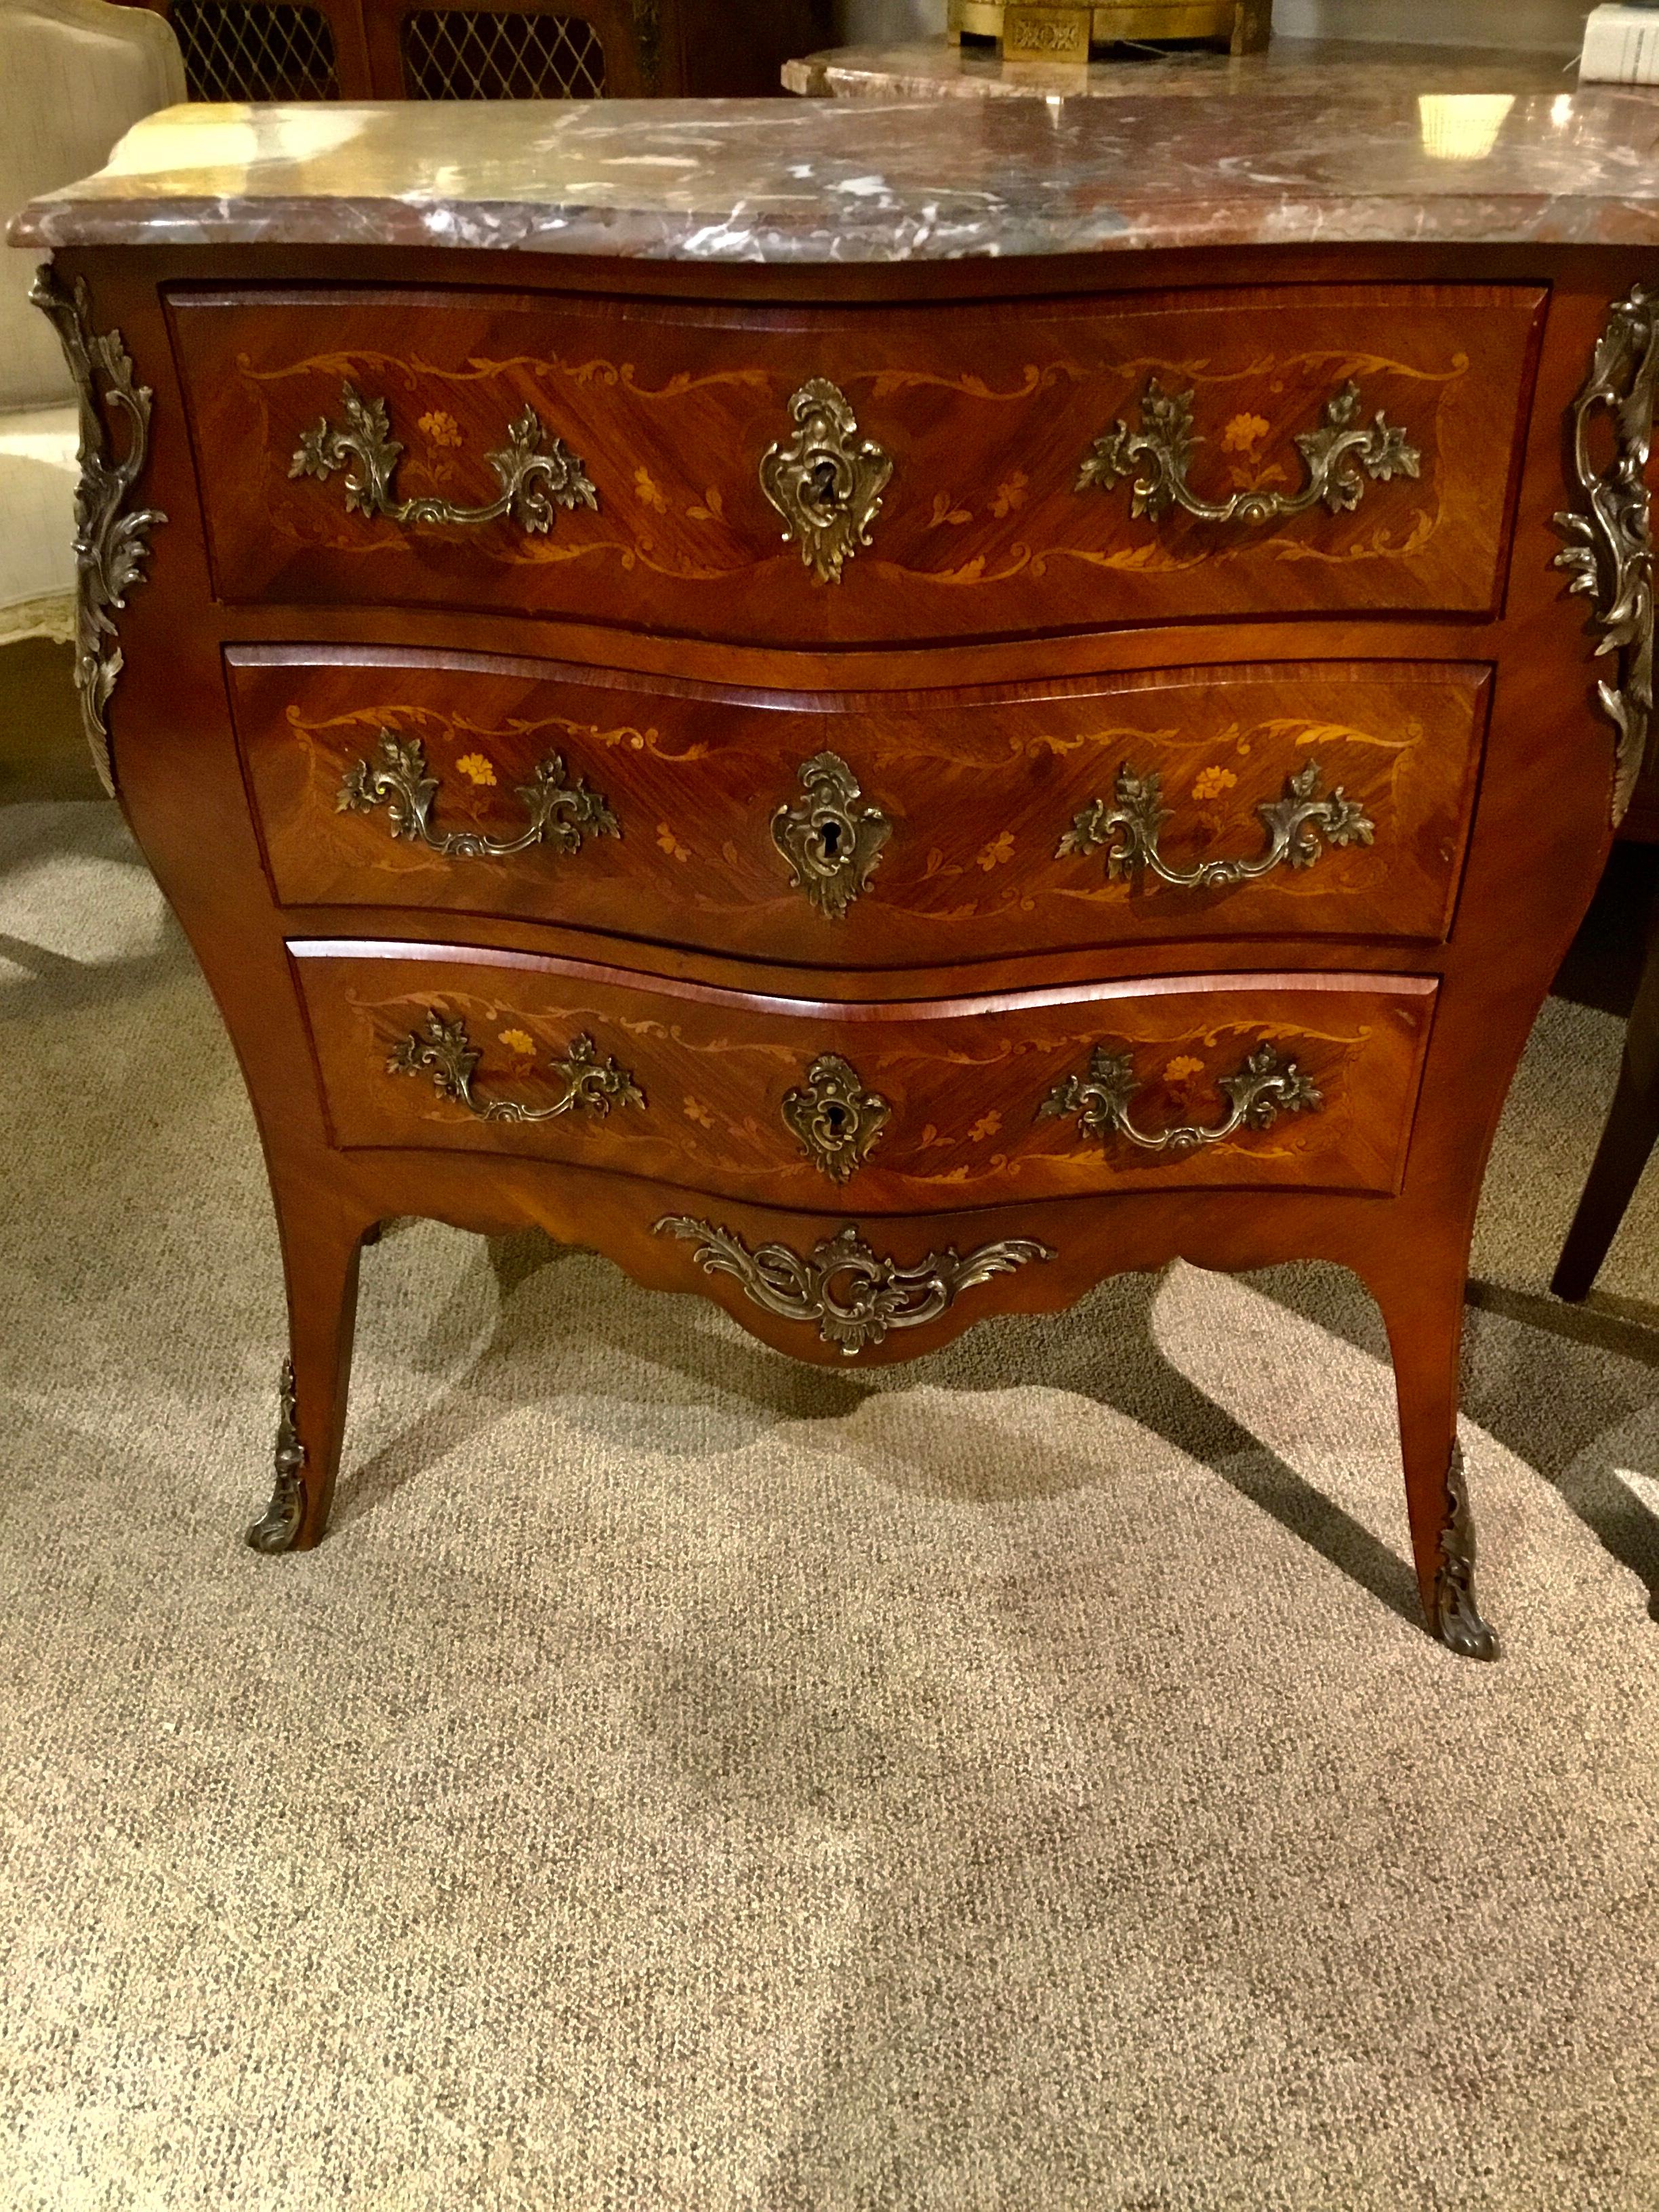 Rouge marble top commode/chest of drawers having three drawers. Intricate floral marquetry inlay in
Satinwood and tulipwood. Bronze mounts on front corner and at center bottom. Sabots are mounted
At the feet. Original bronze handles and key holes.